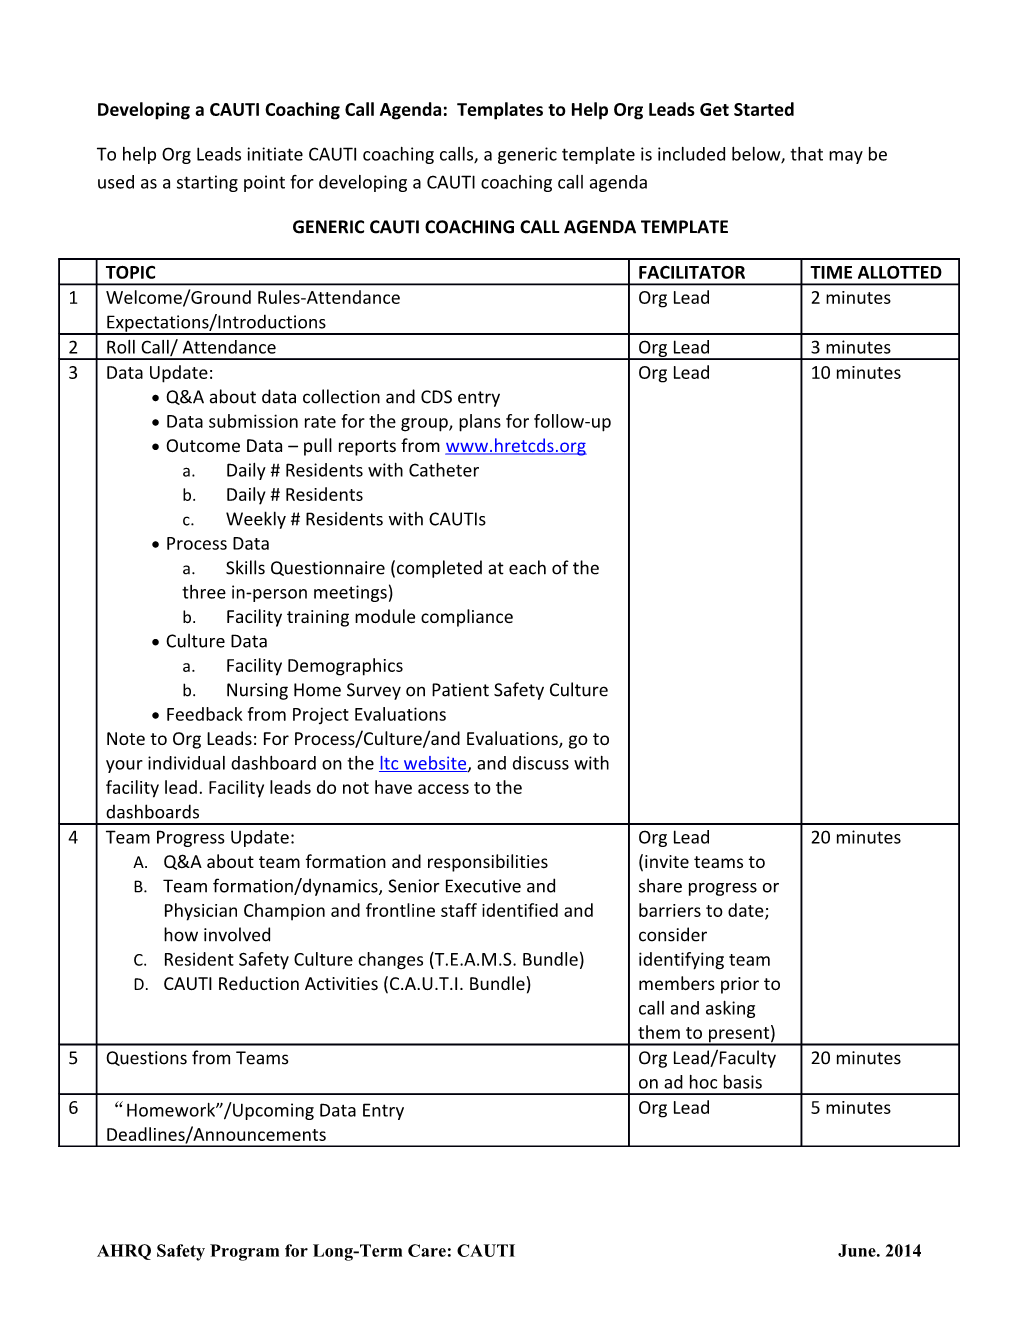 Developing a CAUTI Coaching Call Agenda: Templates to Help Org Leads Get Started